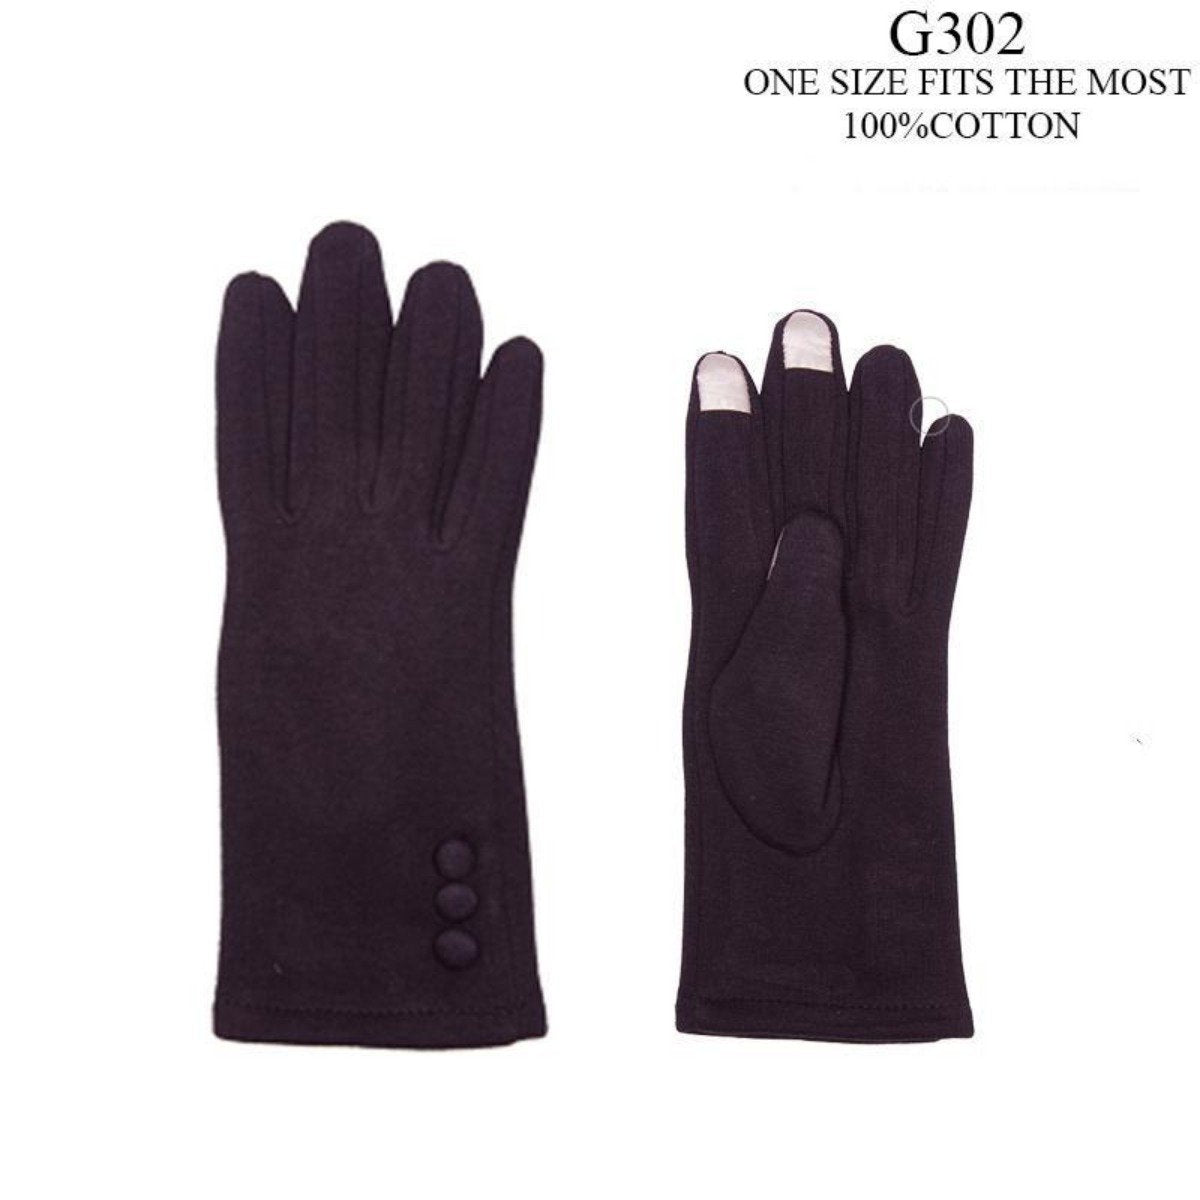 Solid Color Screen-Touch Gloves W/ Buttons - 12Pc Set